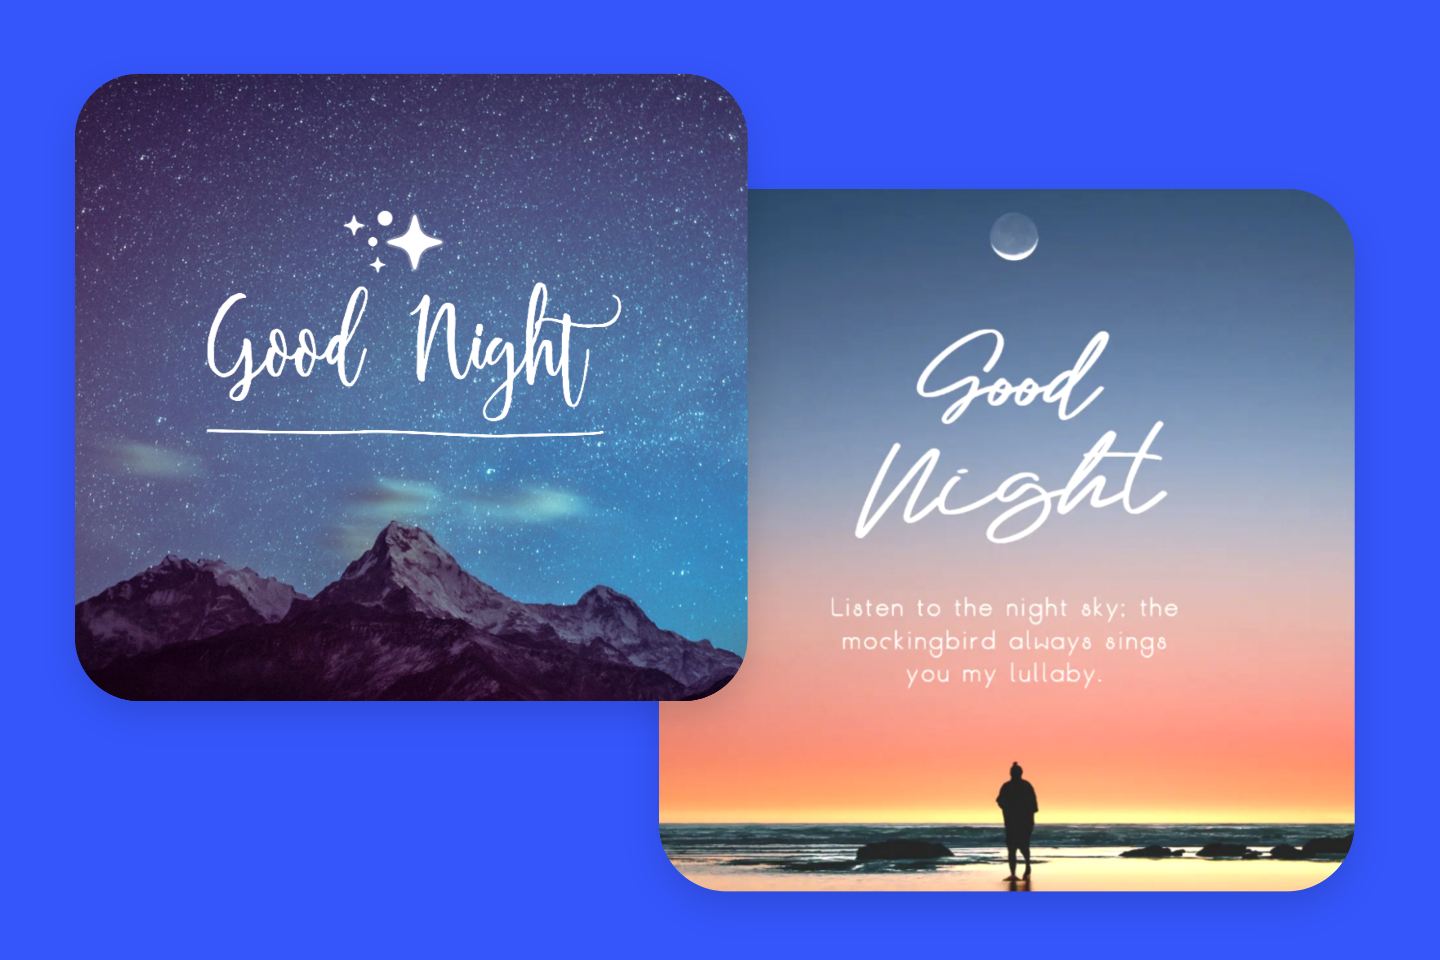 Get Good Night Message Images Instantly for Free| Fotor